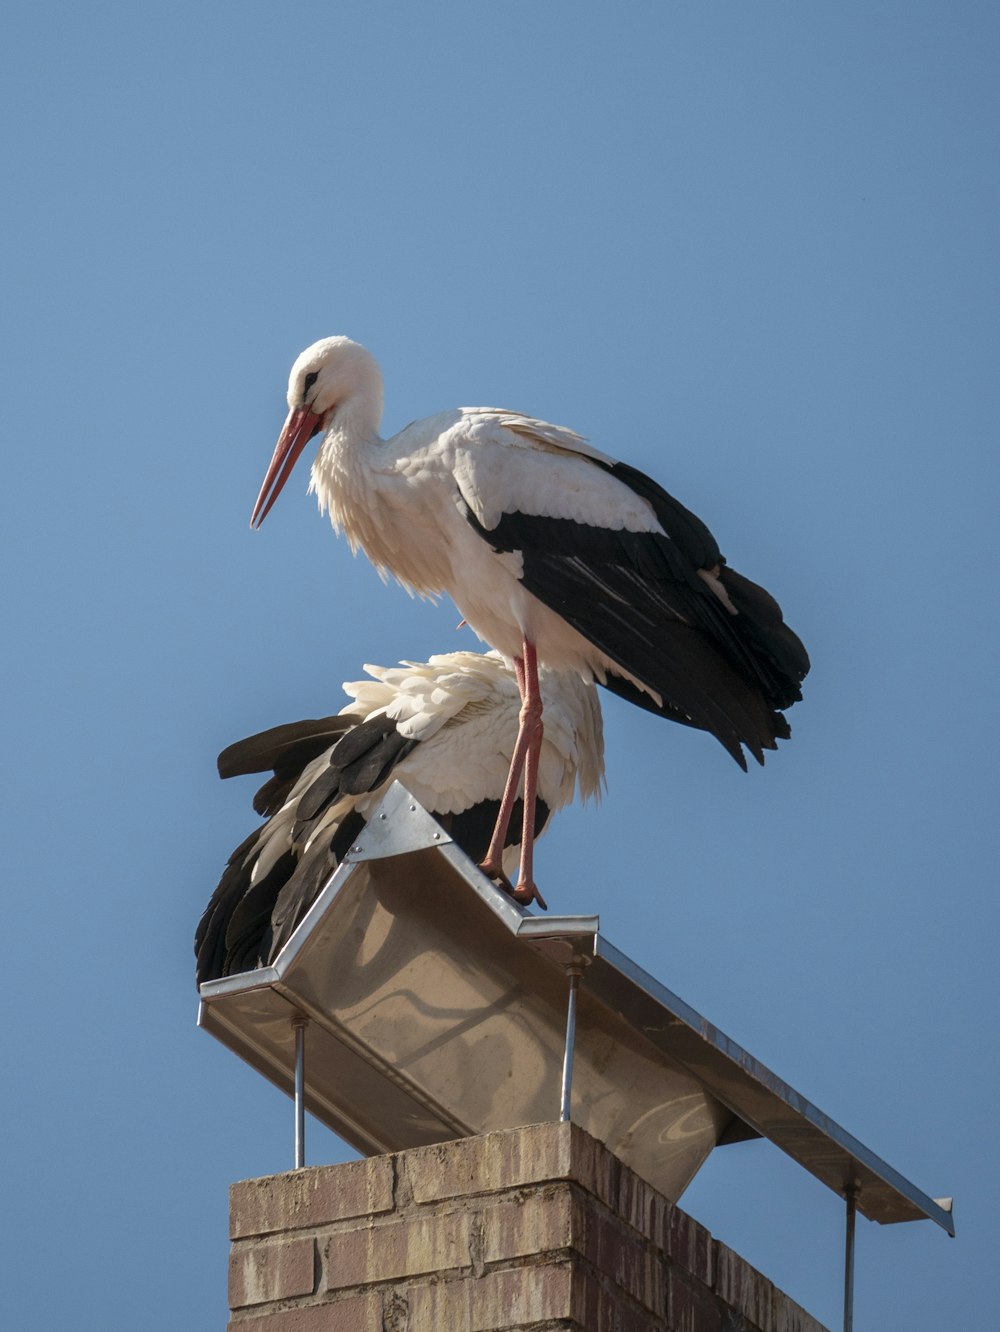 a white and black bird sitting on top of a brick chimney